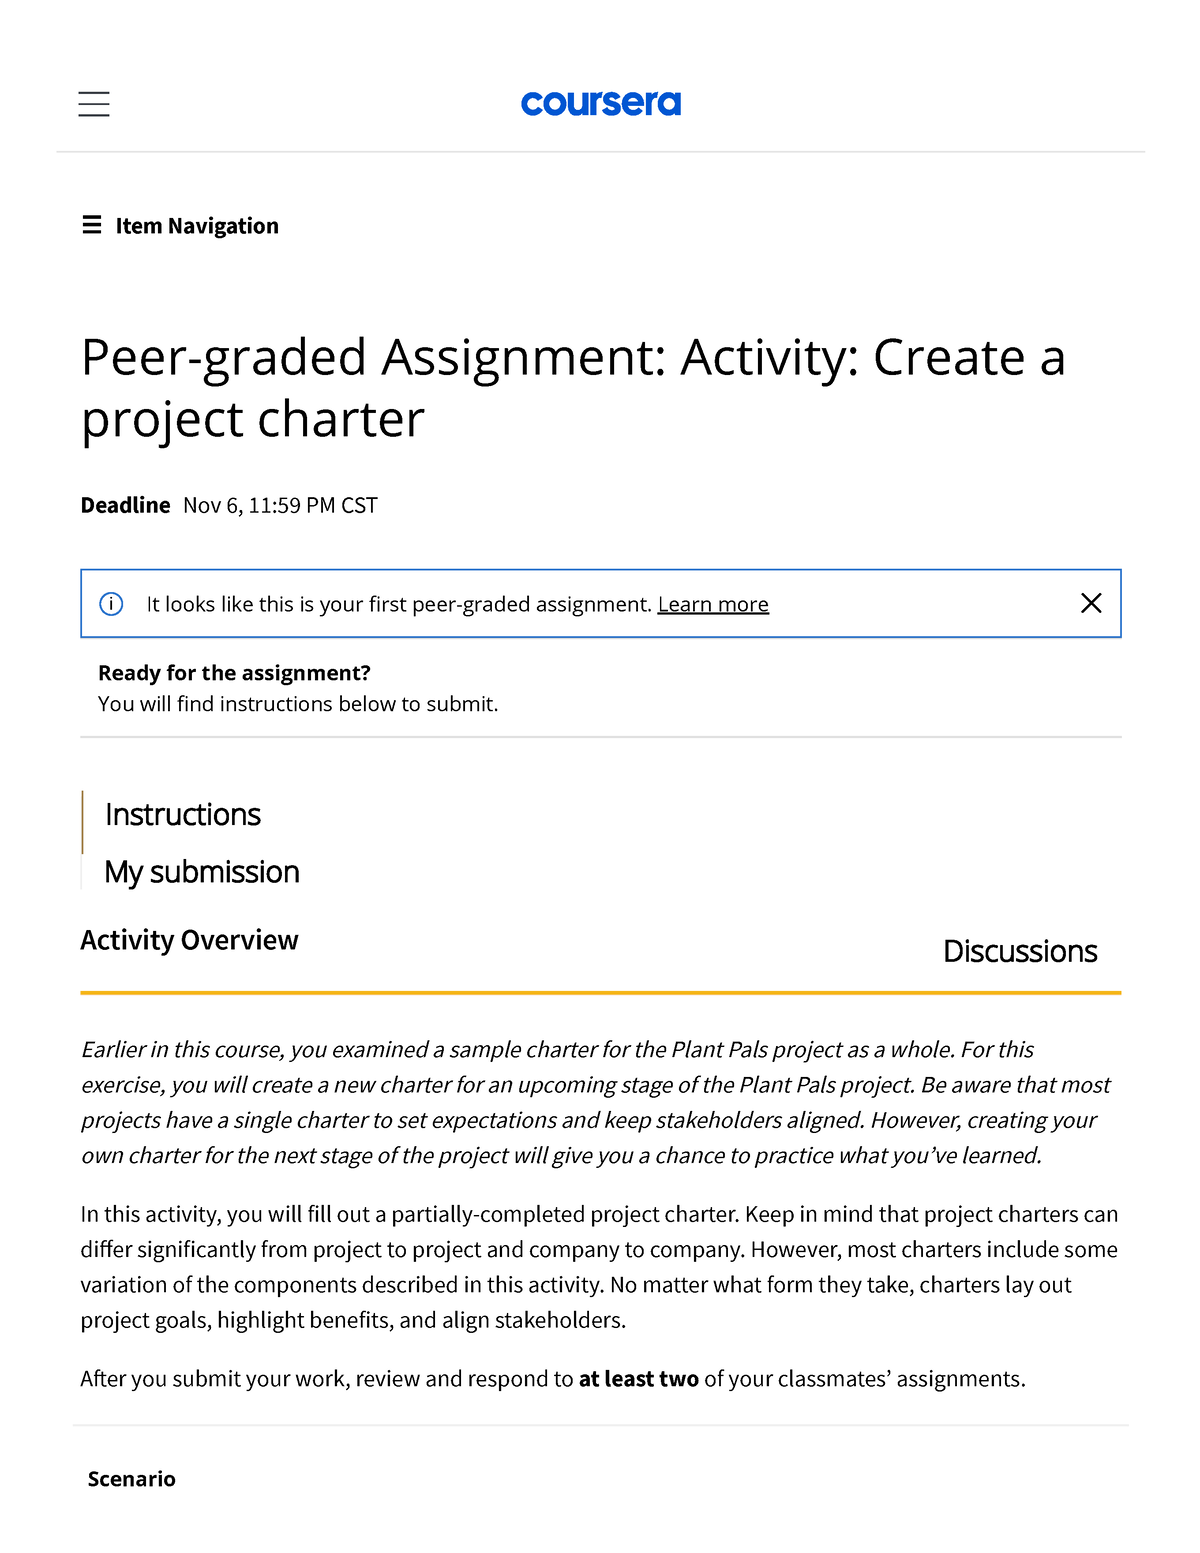 are peer graded assignment in coursera compulsory